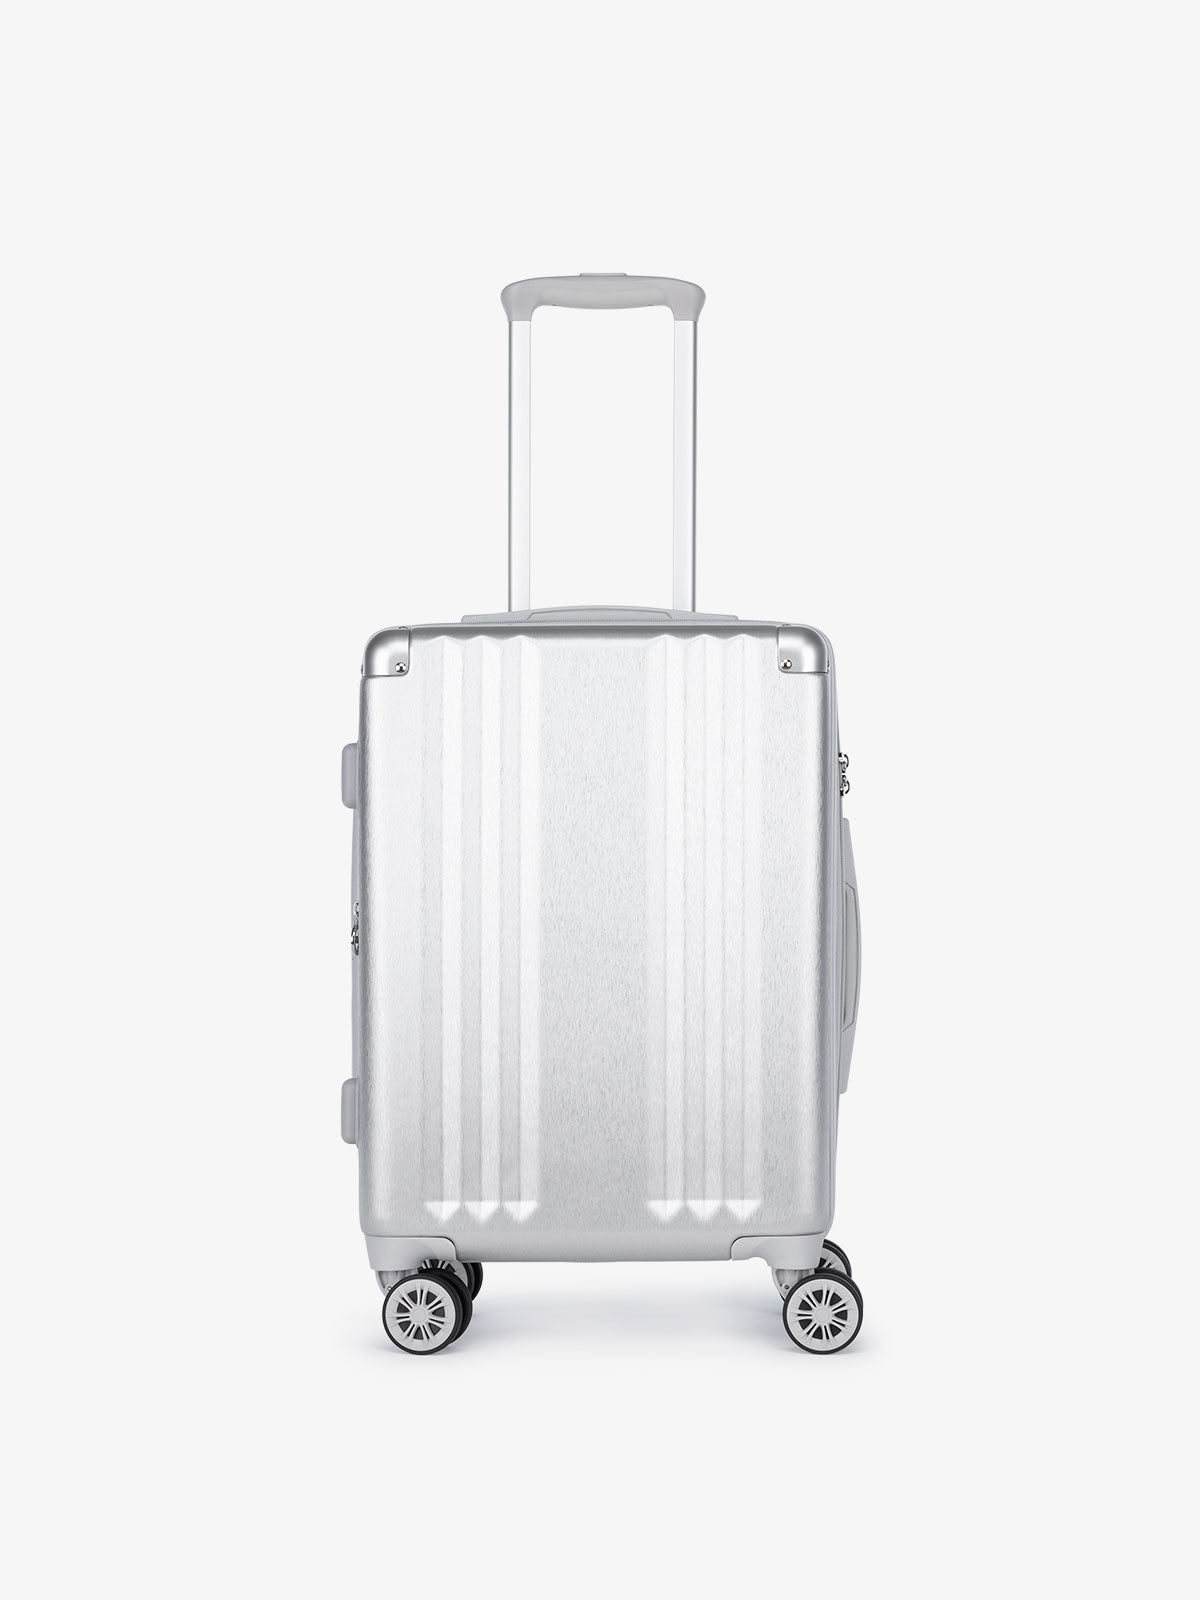 CALPAK Ambeur: lightweight silver carry on luggage part of CALPAK 2 piece luggage sets hard shell